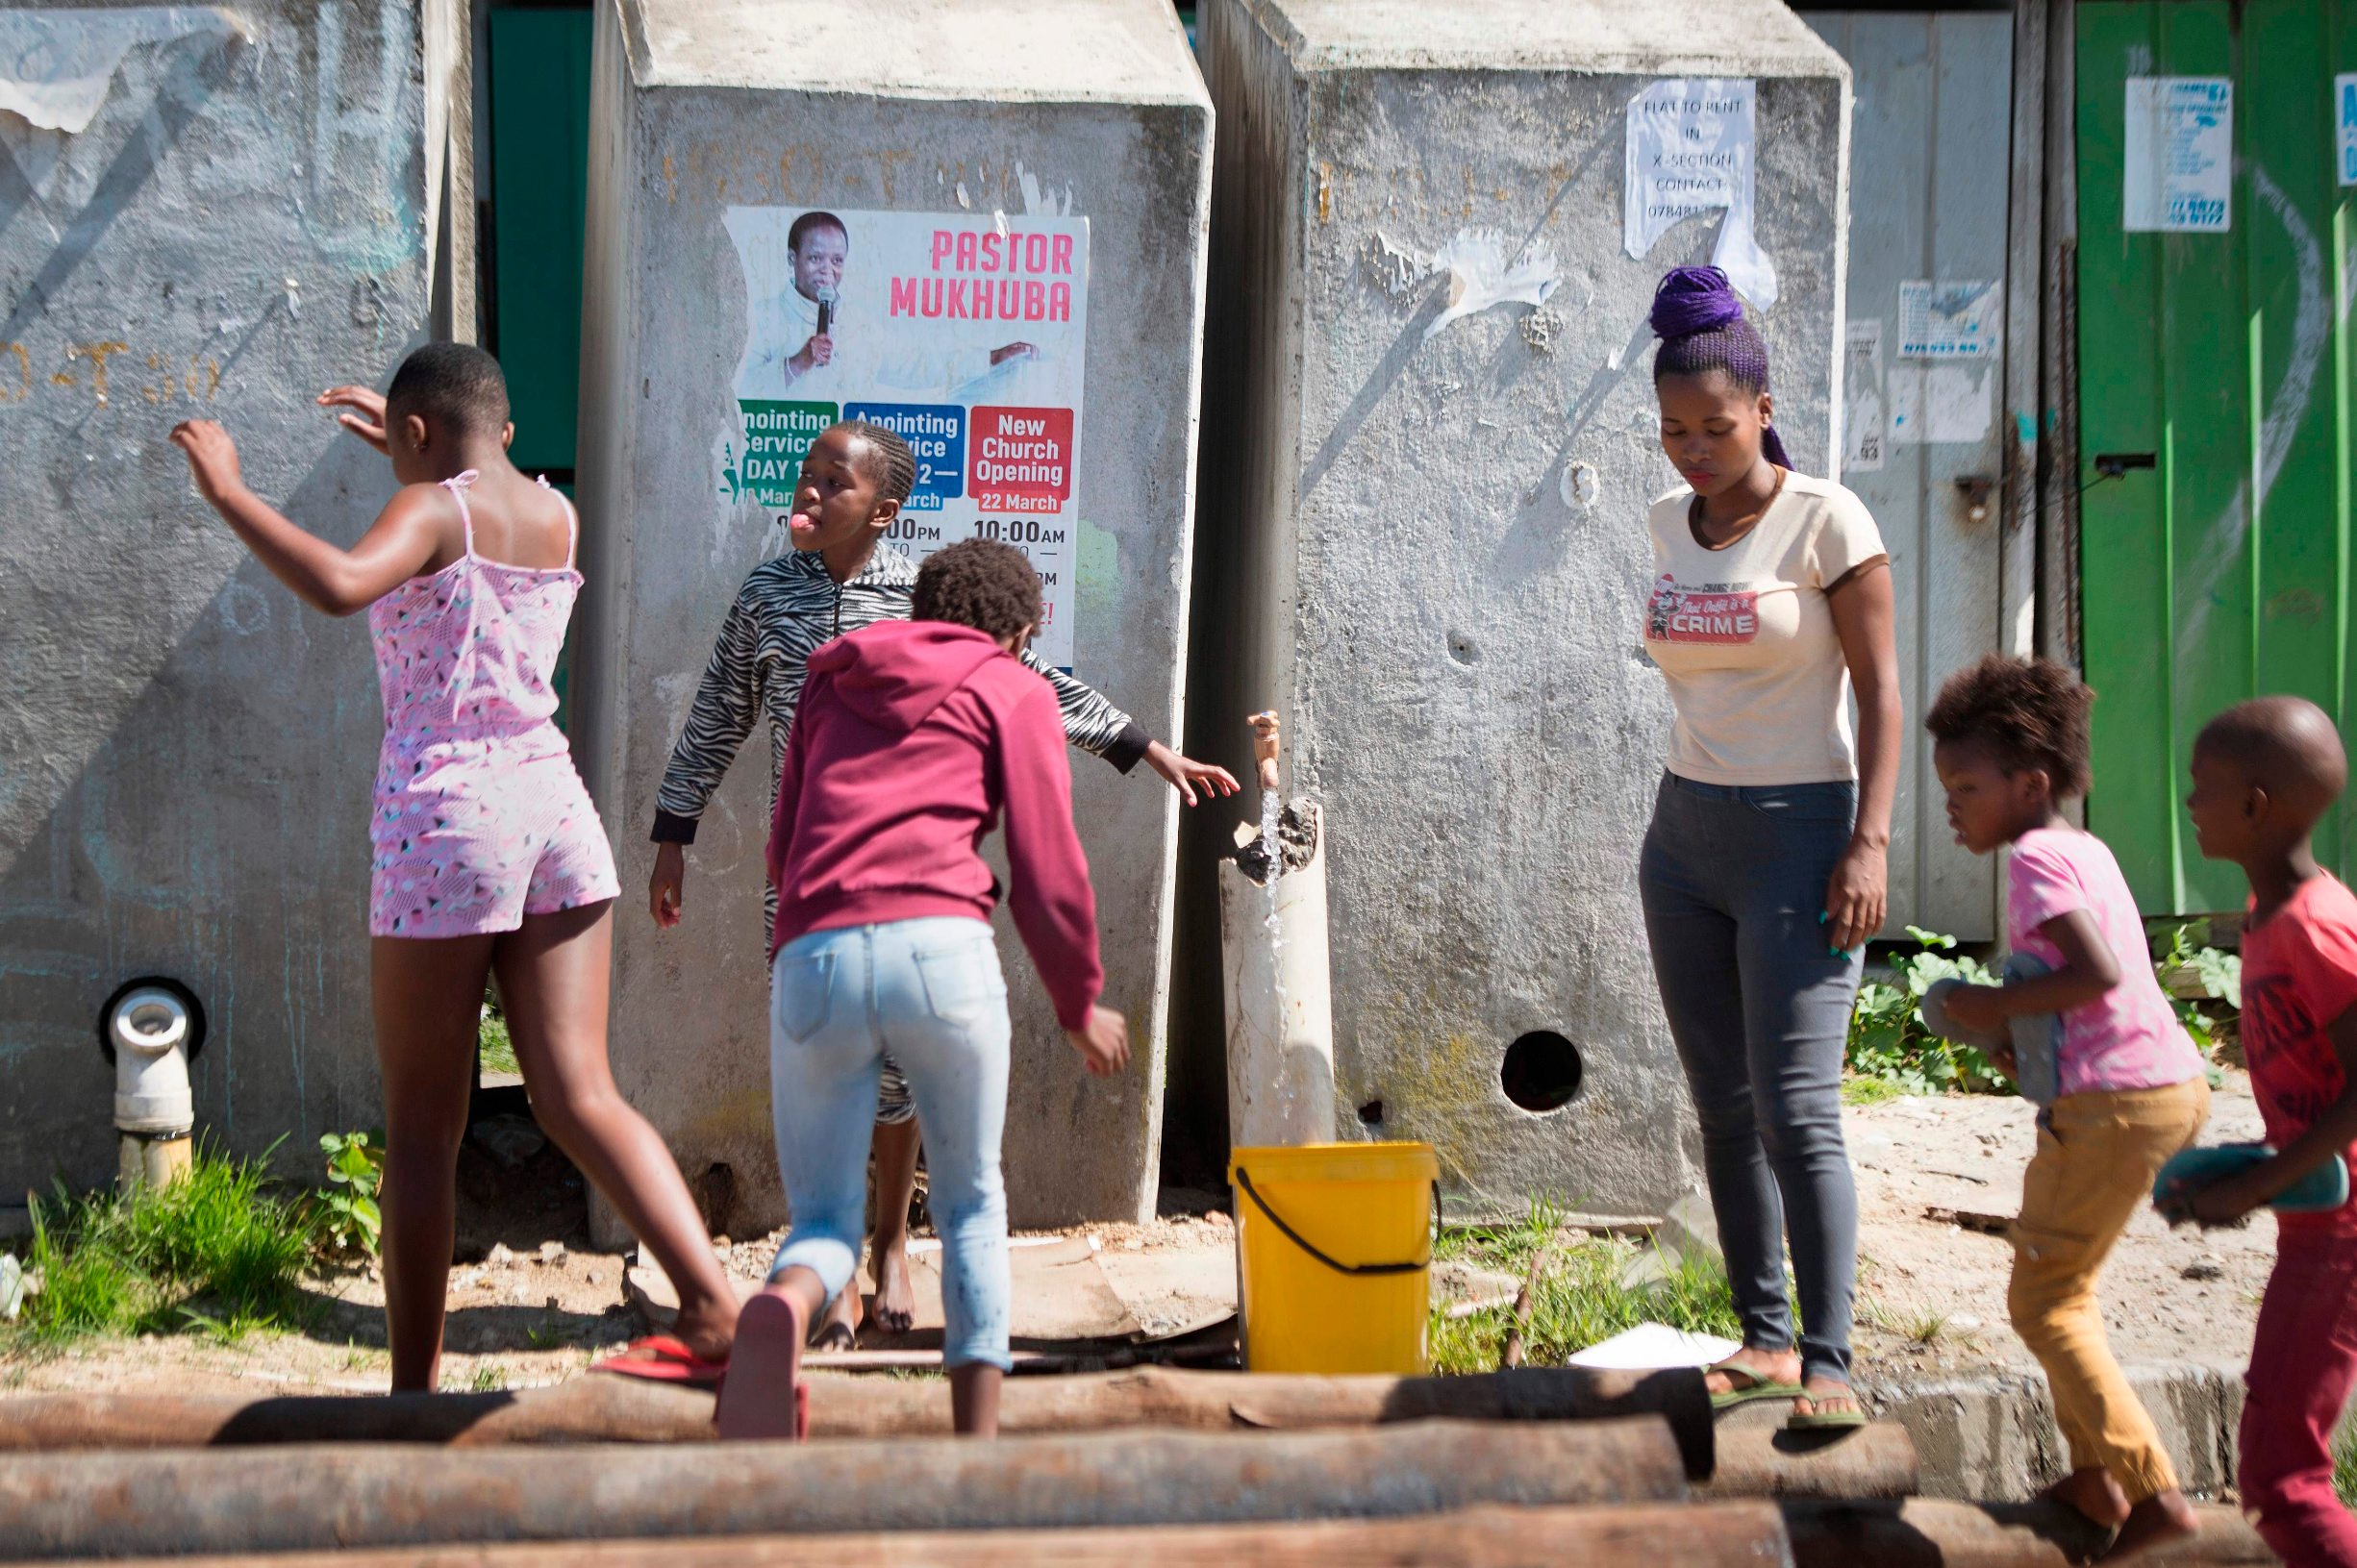 A woman fills a bucket from a communal tap as children play  in front of a line of communal toilets in Khayelitsha, near Cape Town, on March 31, 2020 in Cape Town. - Local government administrators in Cape Town said on March 29, 2020, a COVID-19 coronavirus case had been detected in Khayelitsha, the city's largest township, where hundreds of thousands live in shacks. 
An outbreak in the crowded townships where water and sanitation are problematic, could prove difficult to contain in the country which already has the highest number of infections in Africa. (Photo by RODGER BOSCH / AFP)